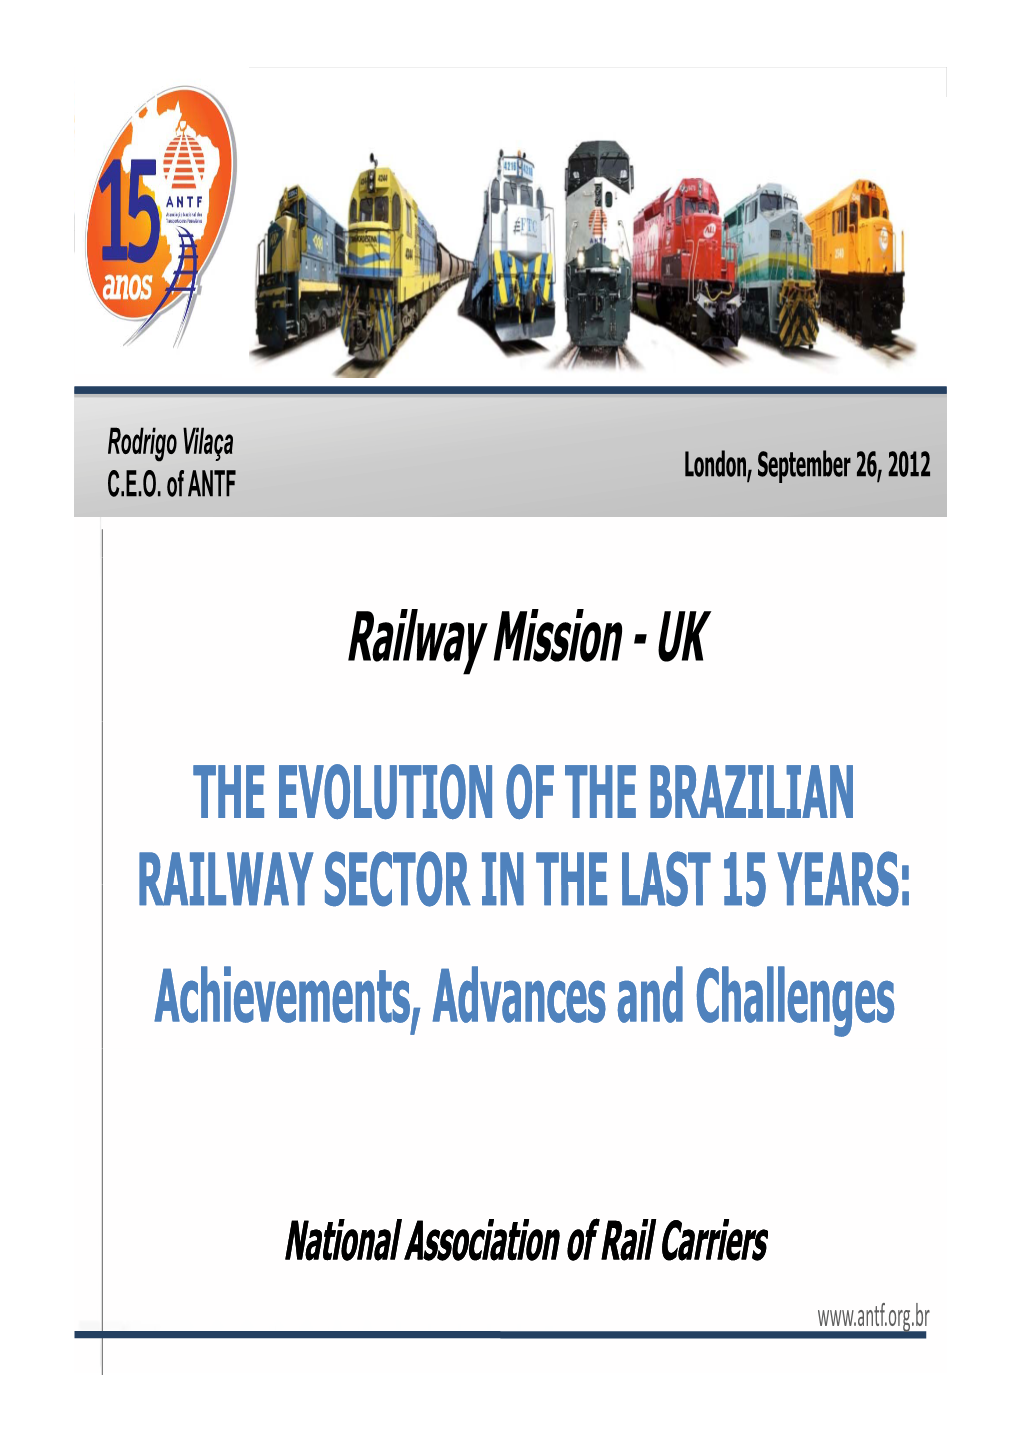 THE EVOLUTION of the BRAZILIAN RAILWAY SECTOR in the LAST 15 YEARS: Achievements, Advances and Challenges